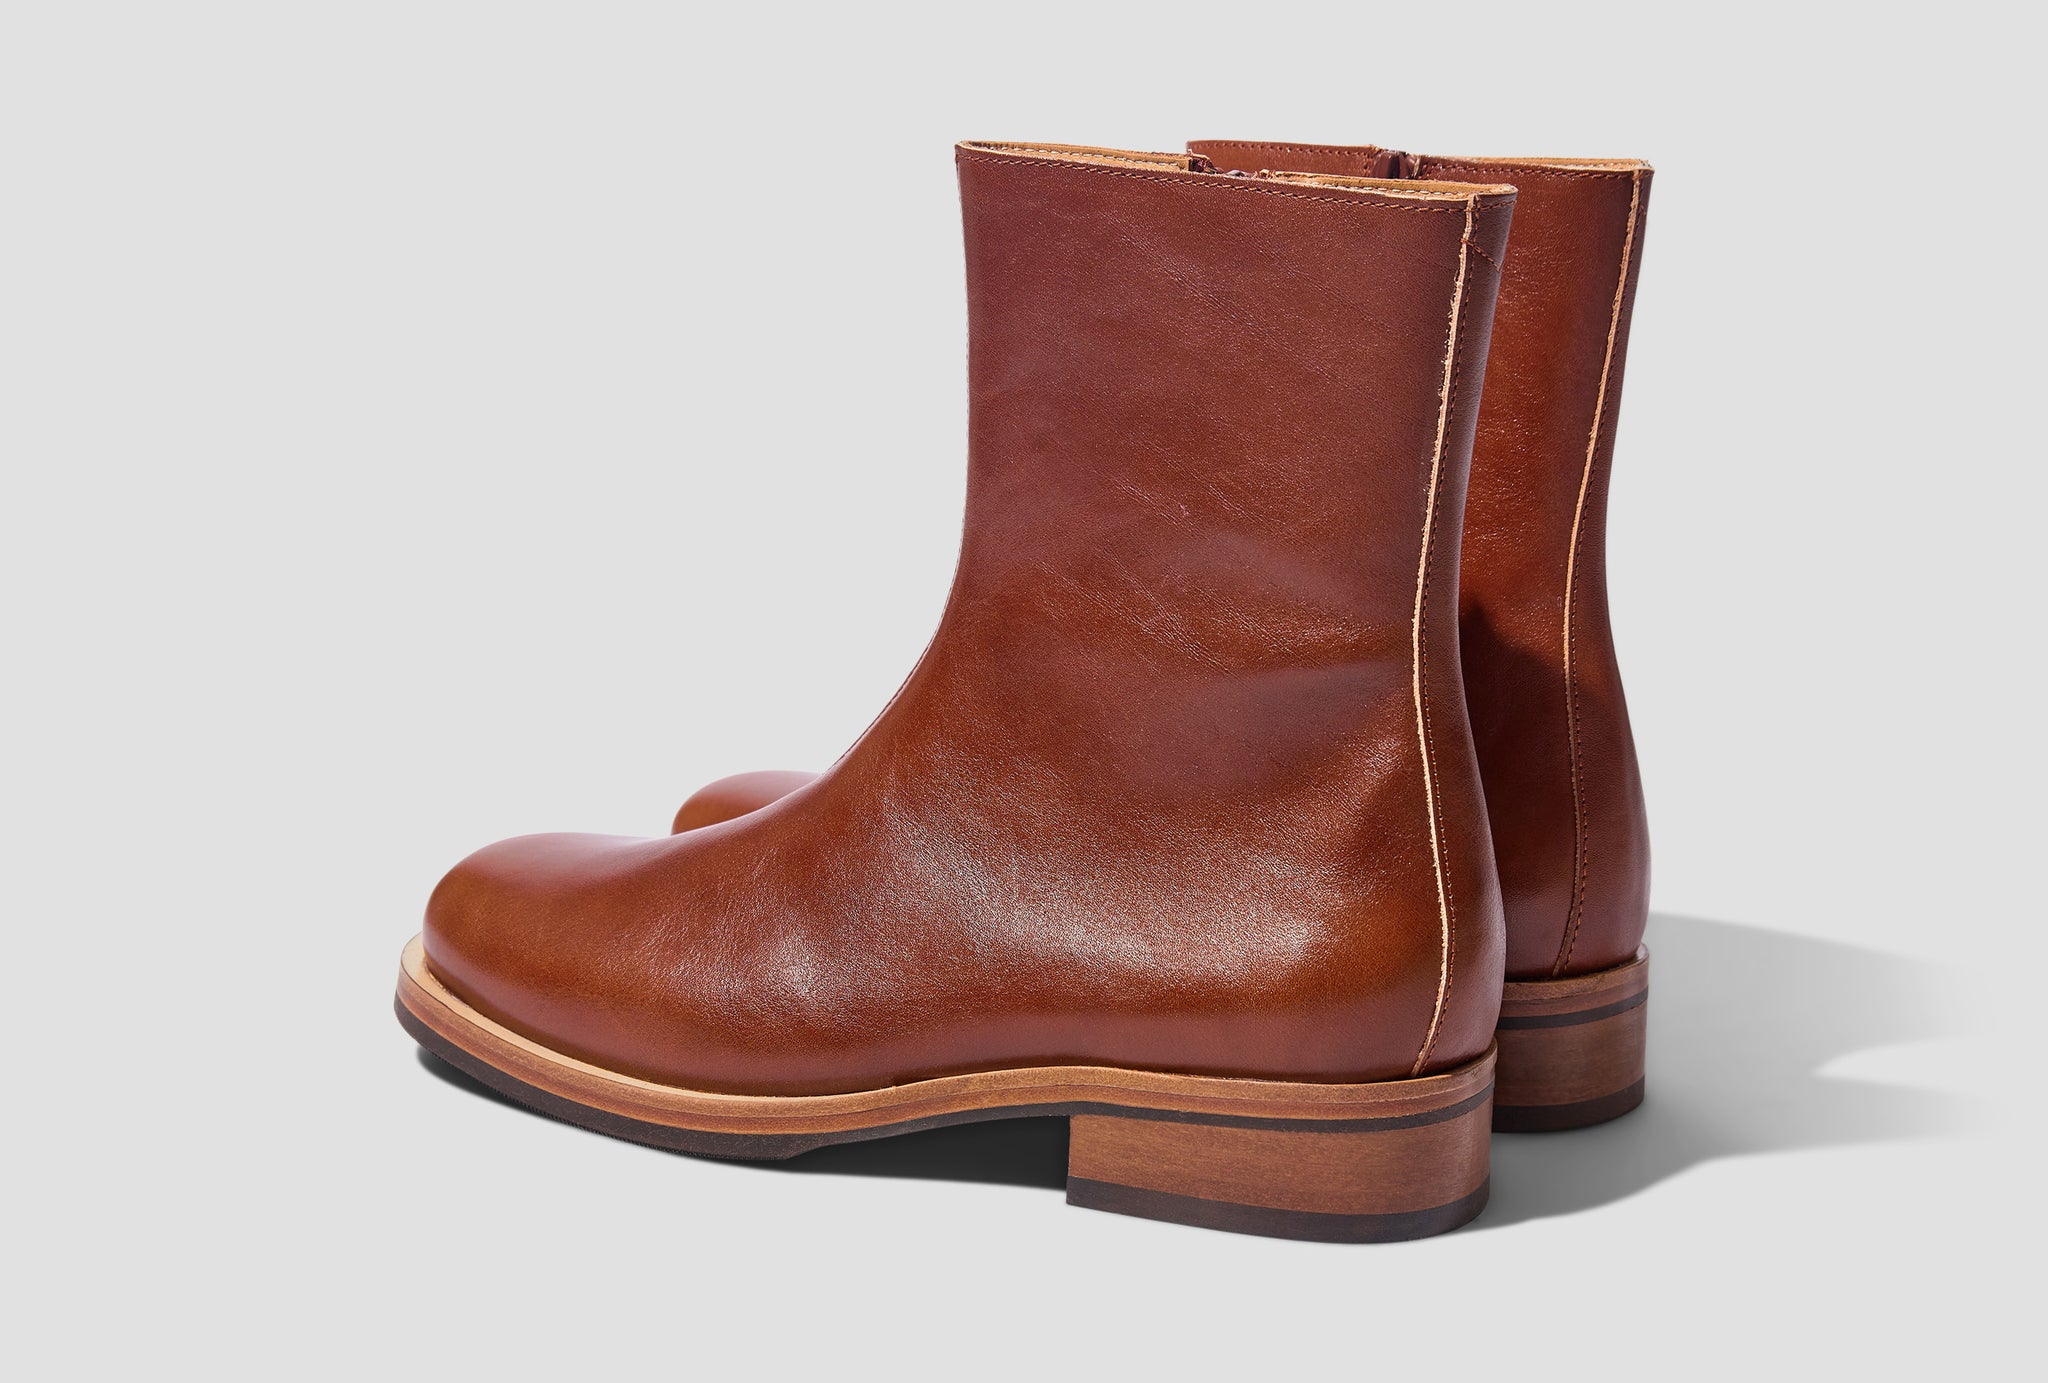 CAMION BOOT - COGNAC BROWN LEATHER A4227CAC Brown